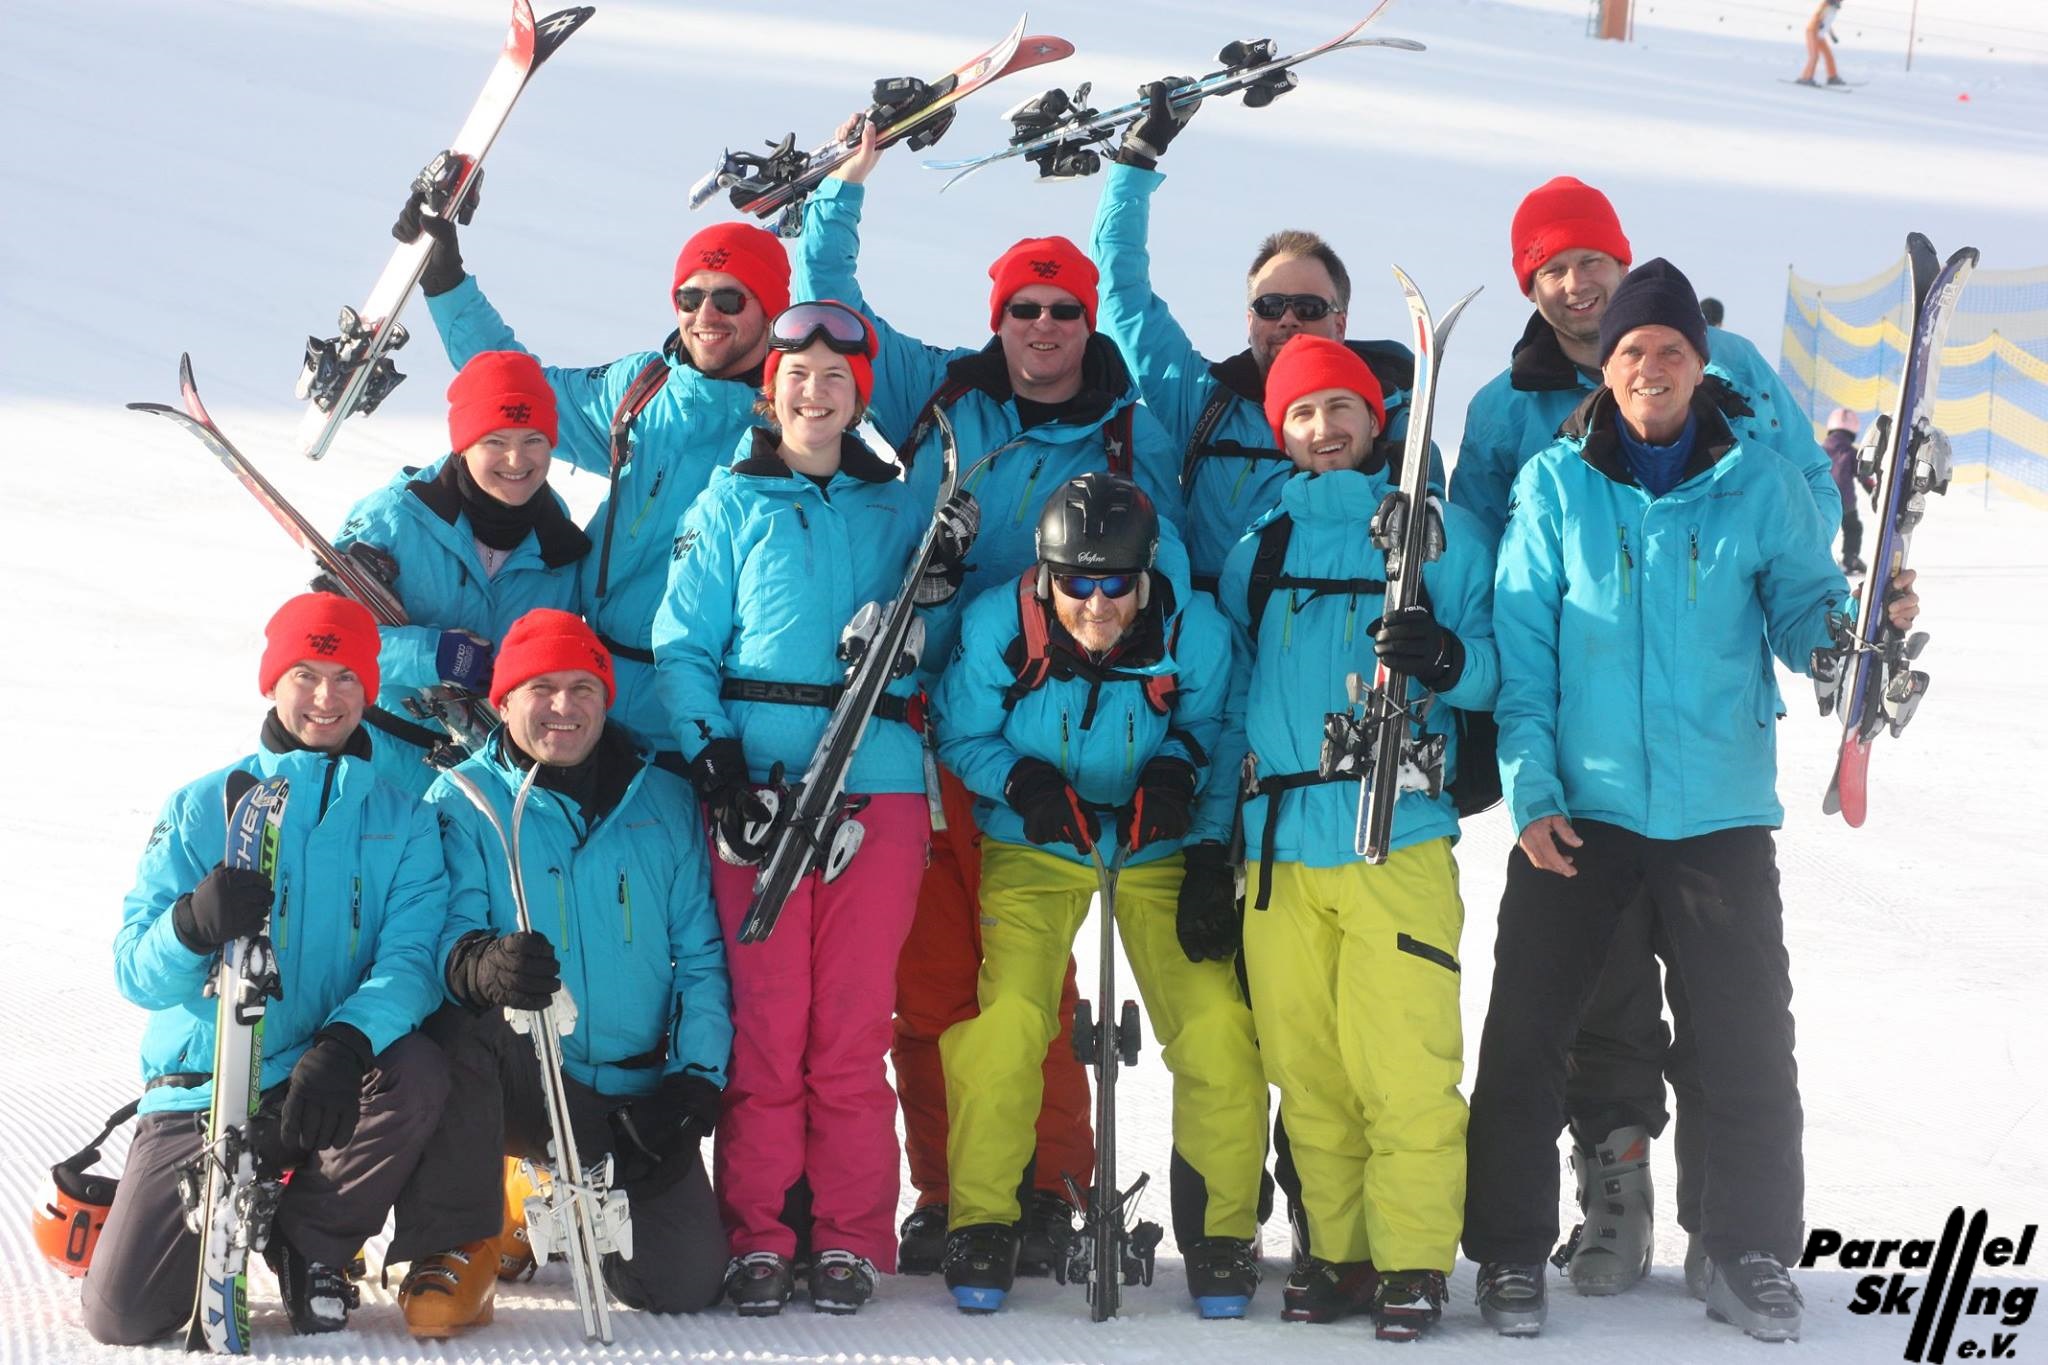 Instructors with Short Skis